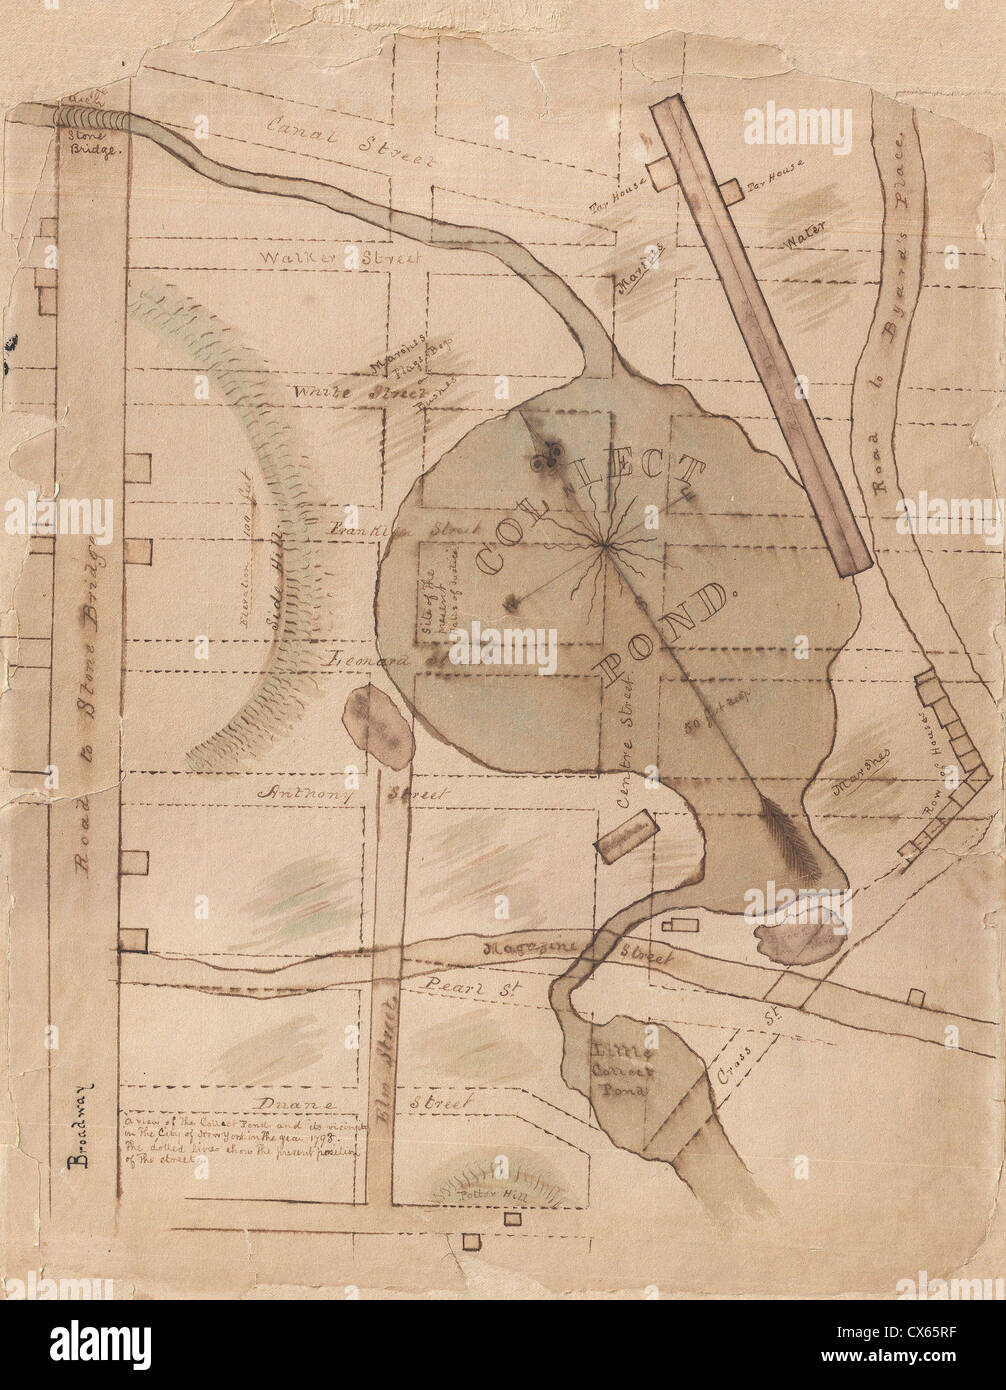 1840 Manuscript Map of the Collect Pond and Five Points, New York City Stock Photo